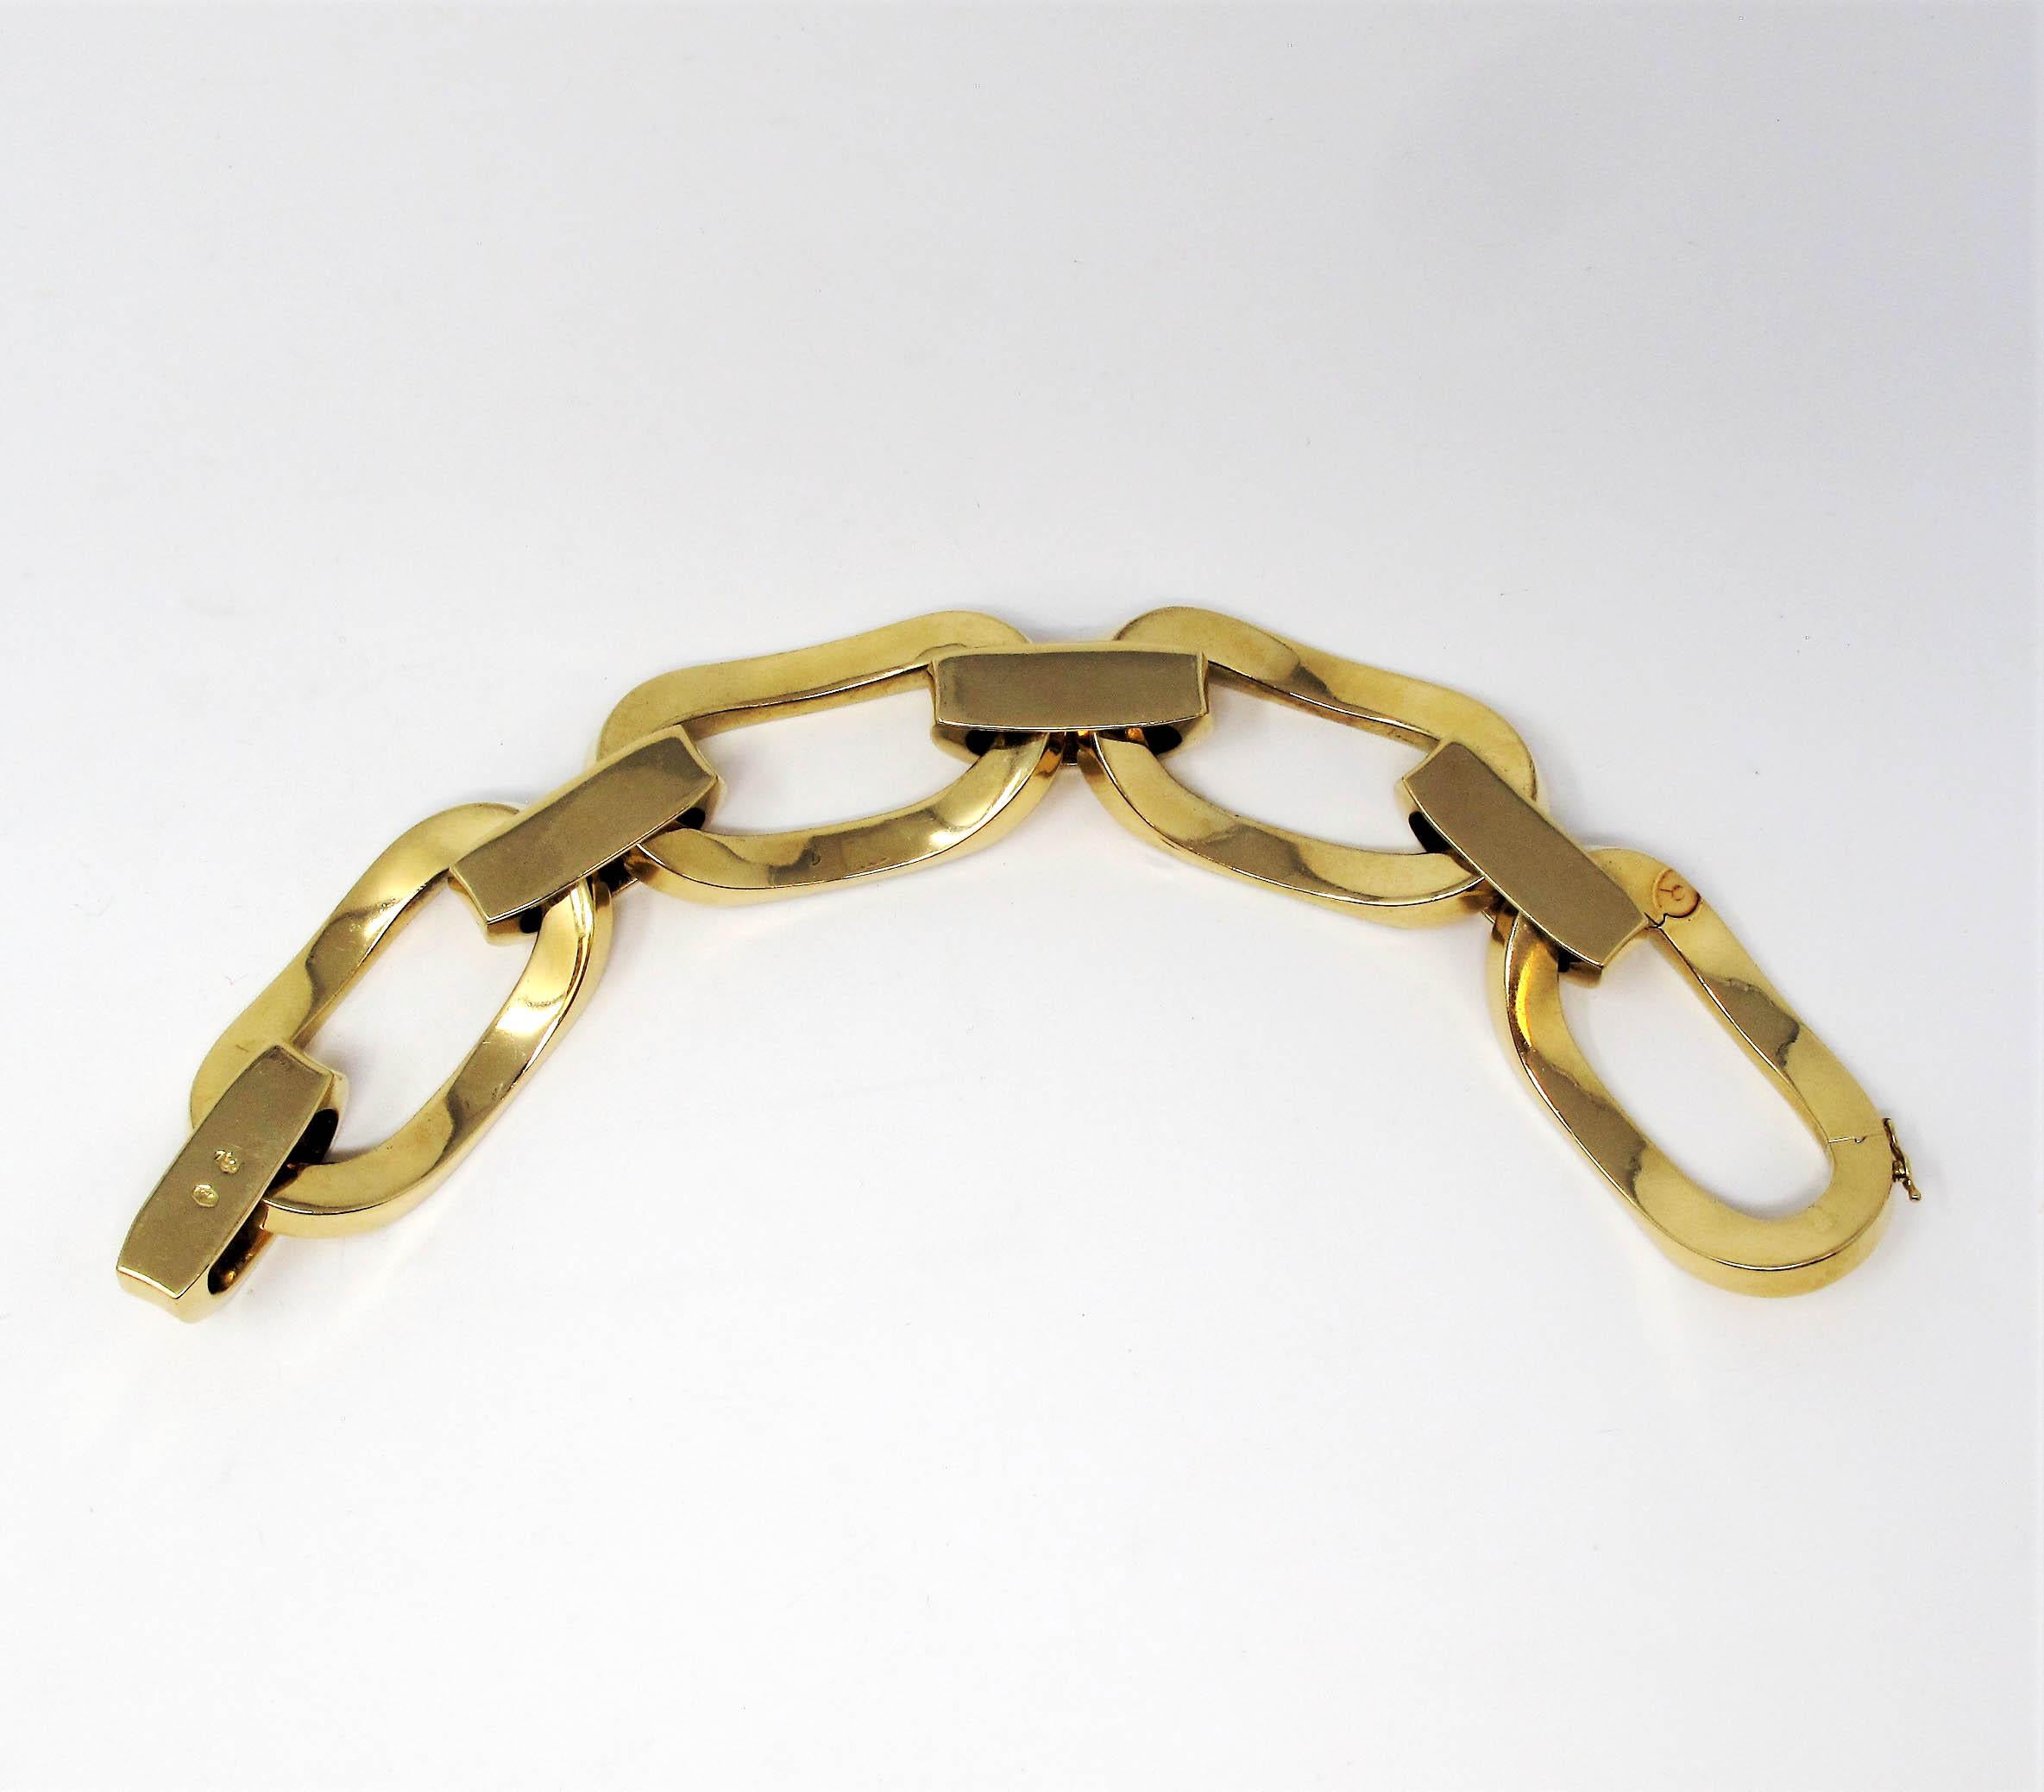 Two-Tone 18 Karat Yellow and White Gold Extra Large Link Bracelet Contemporary 7